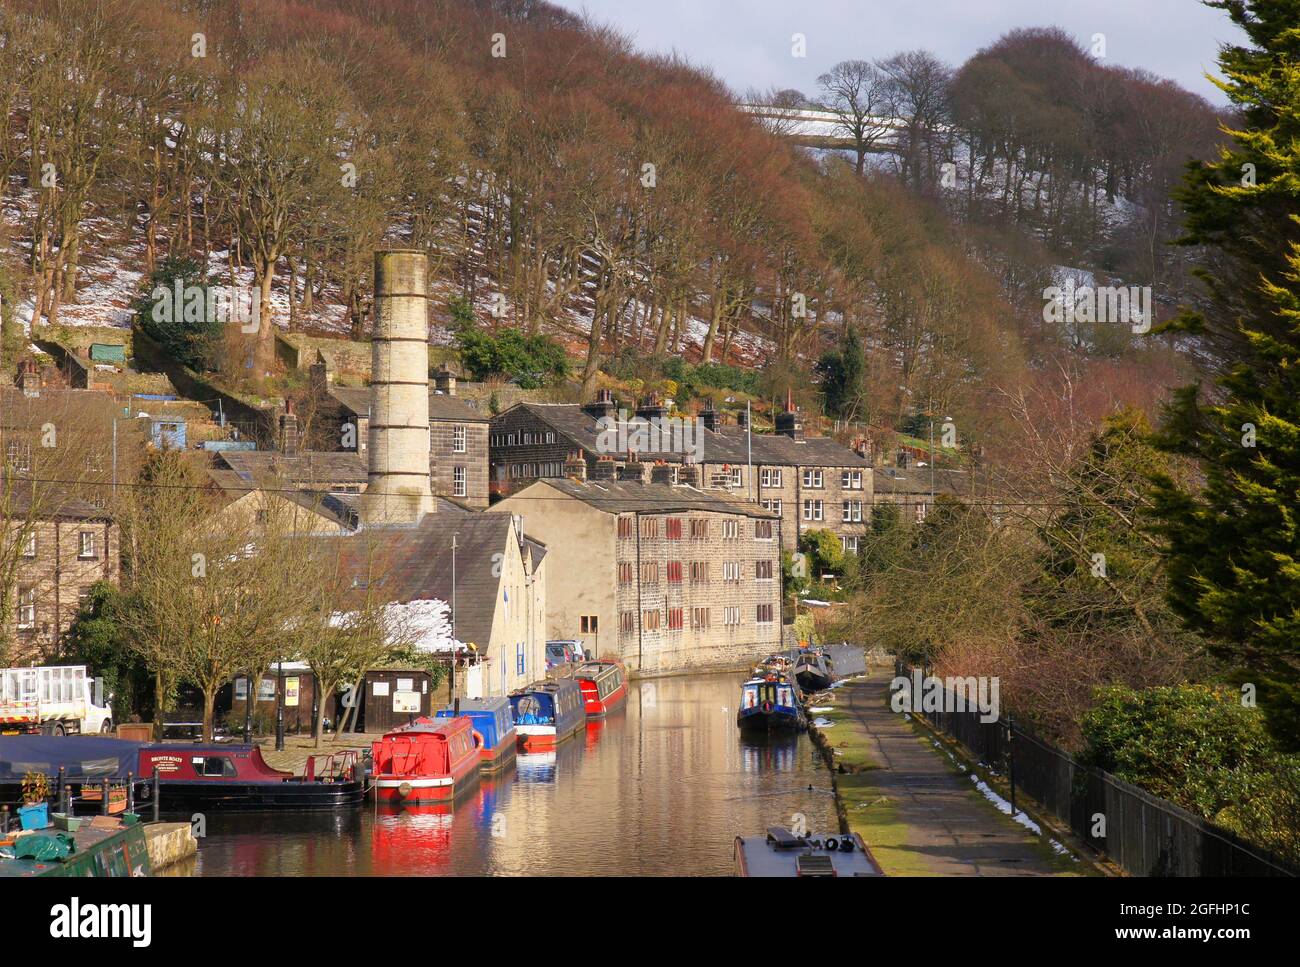 Tree covered hills with a dusting of snow, old mills and colourful long boats on the Rochdale Canal in Hebden Bridge, West Yorkshire, England Stock Photo